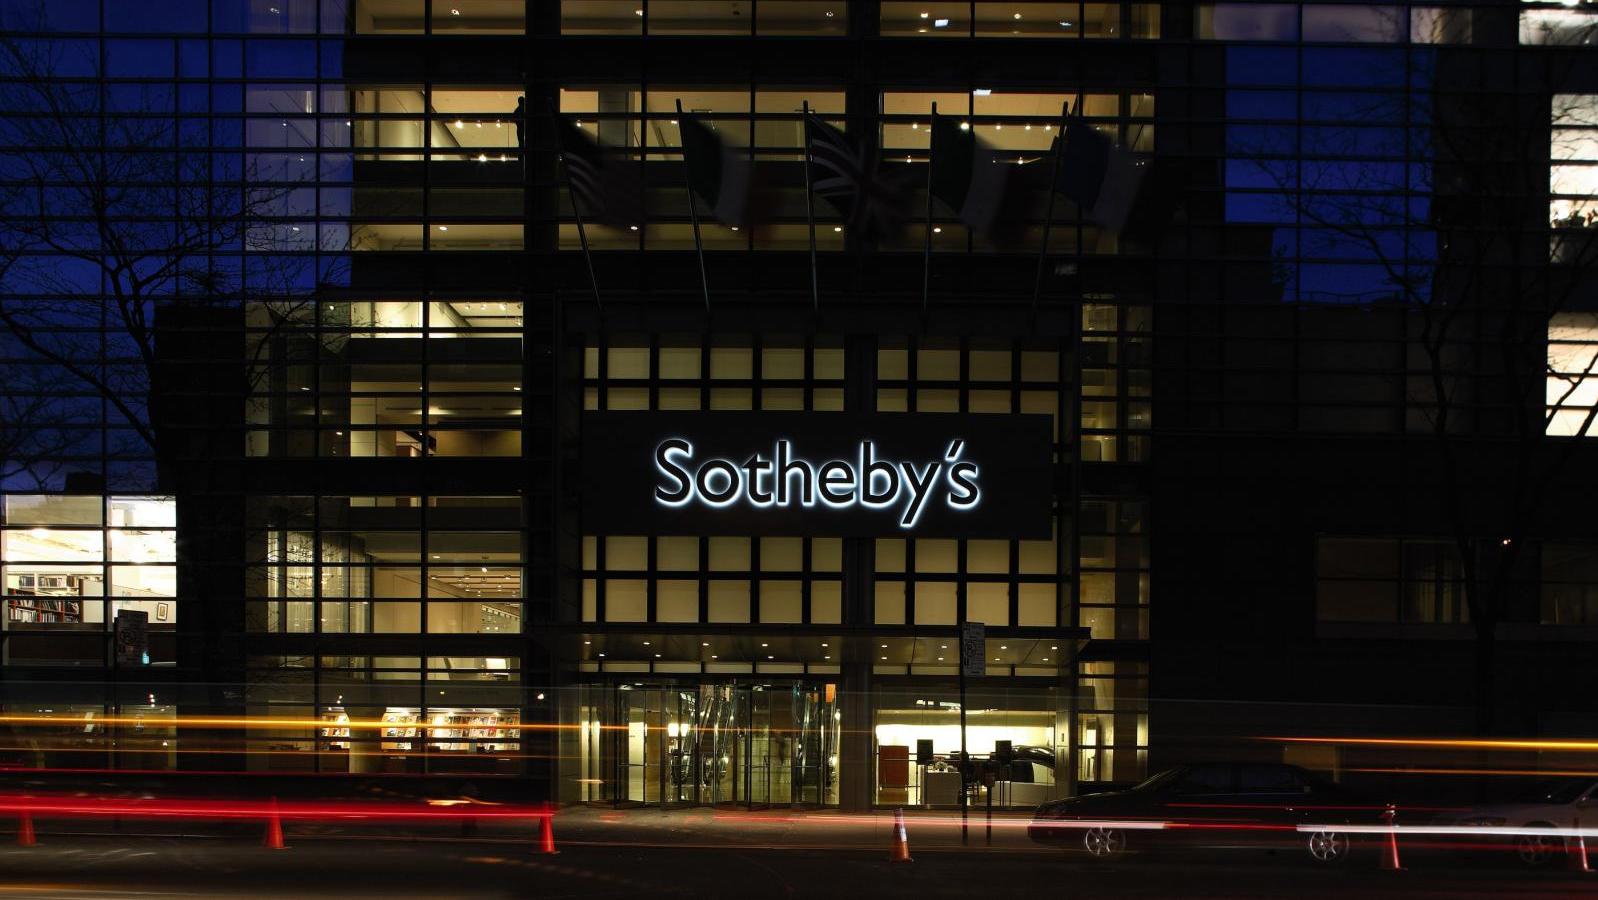   Buying Sotheby’s? What an Odd Idea!